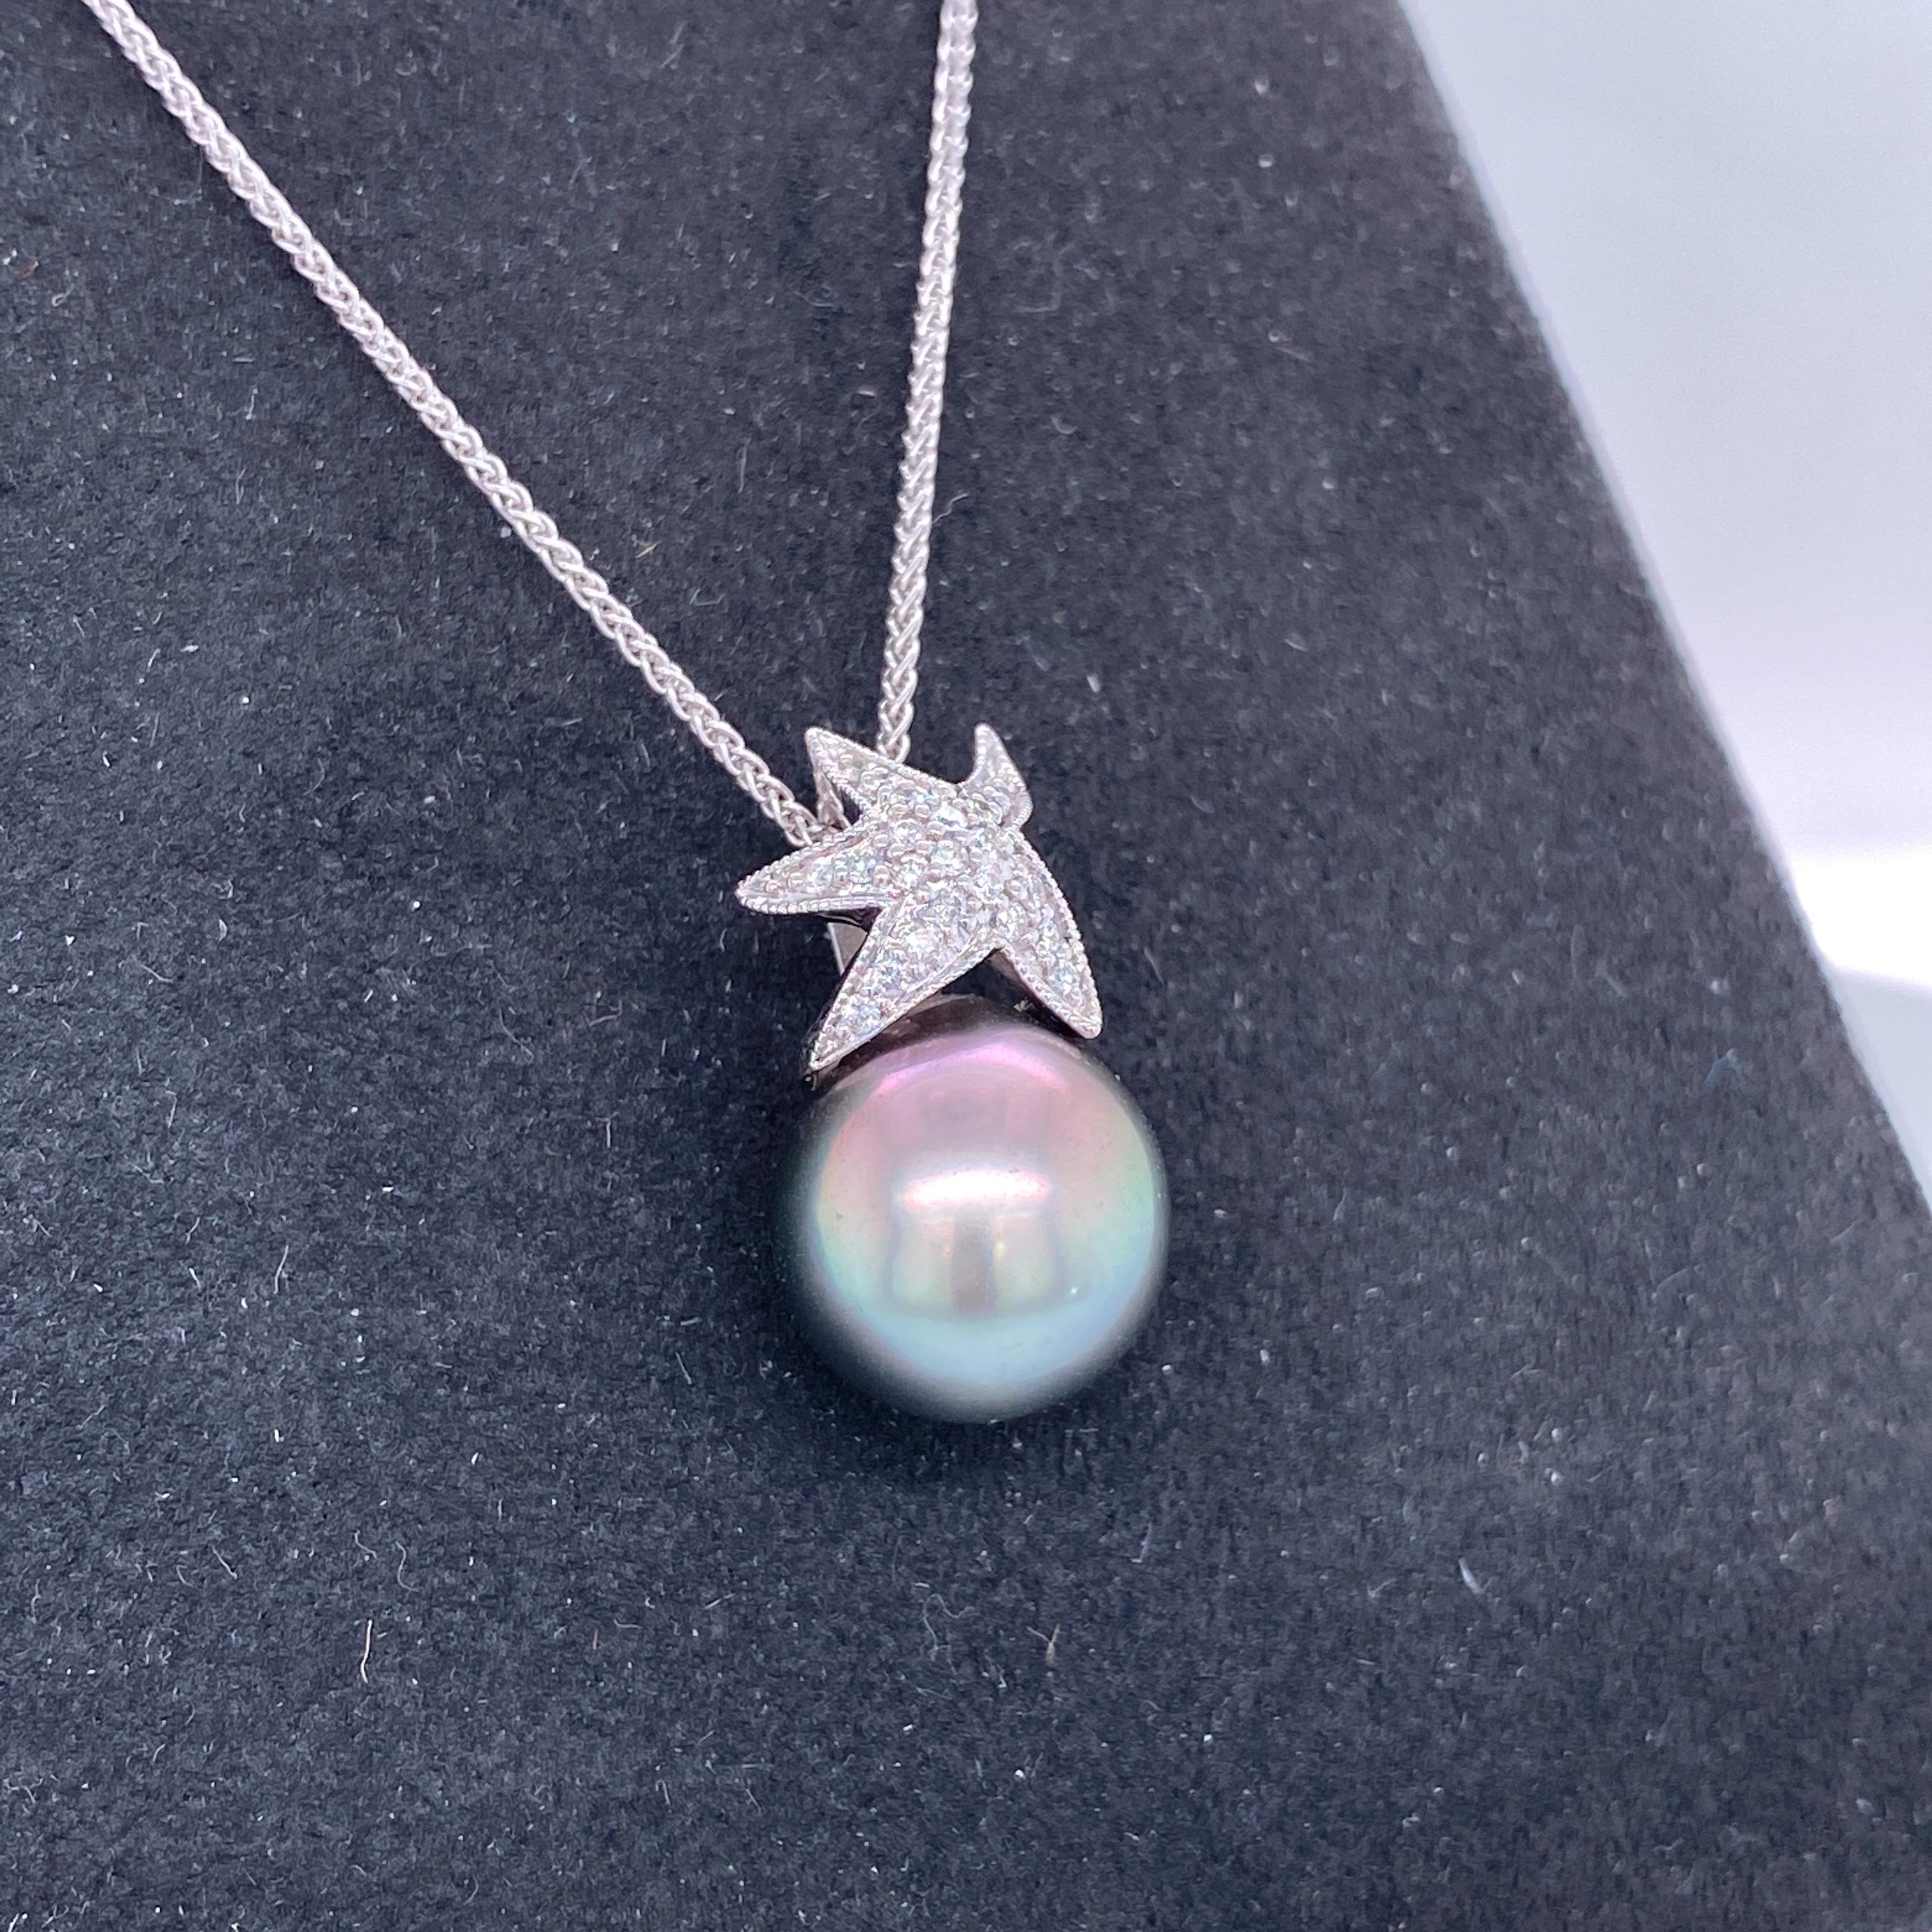 18K White gold pendant necklace featuring one diamond starfish motif weighing 0.13 carats and a Tahitian pearl measuring 11-12 mm.
Color G-H
Clarity SI